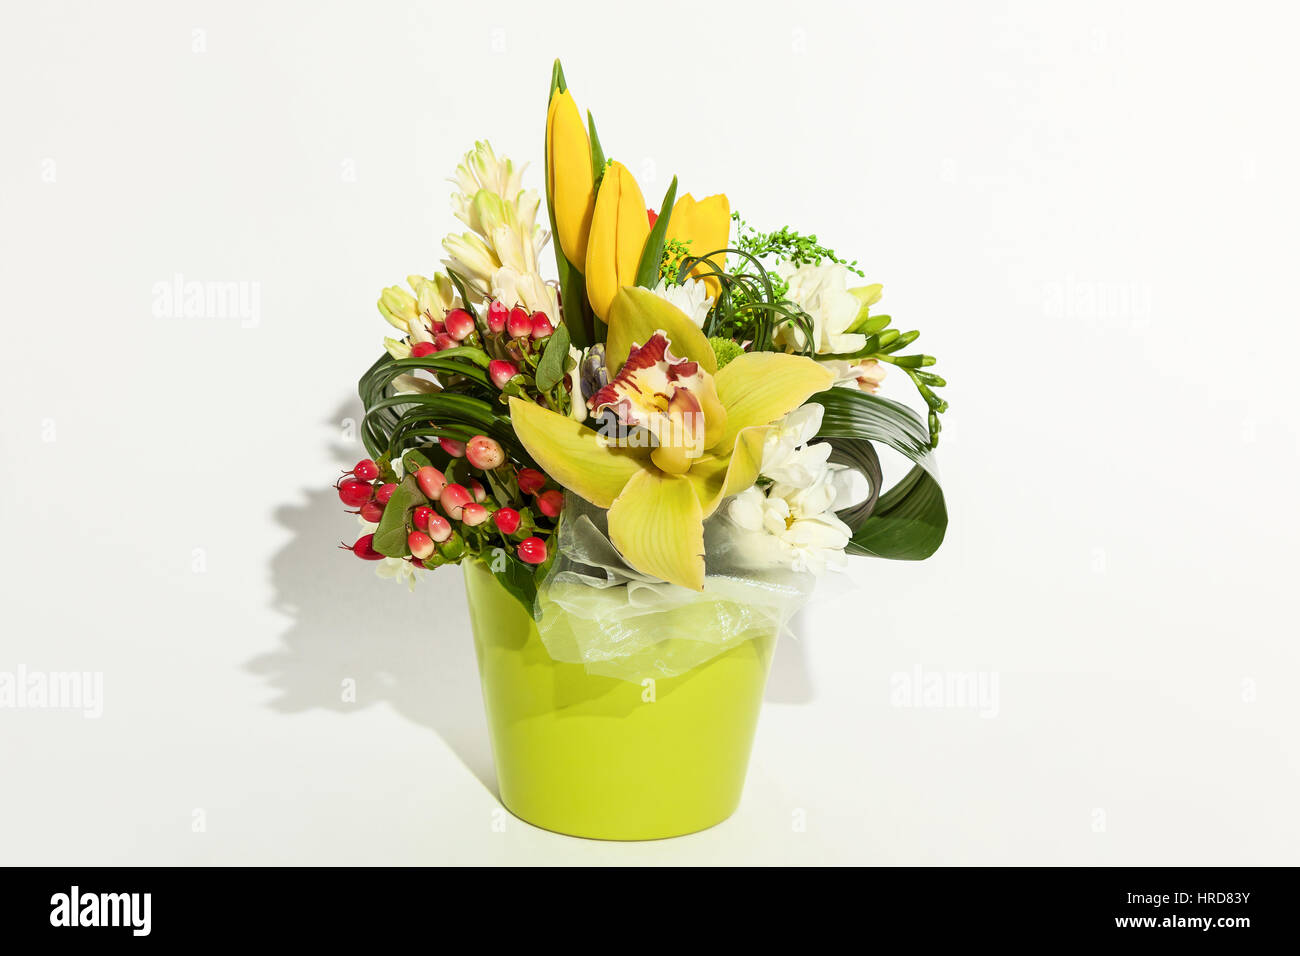 colorful floral bouquet of orchids, tulips, chrysanthemums,  and red hypericums  in vase isolated on white background Stock Photo